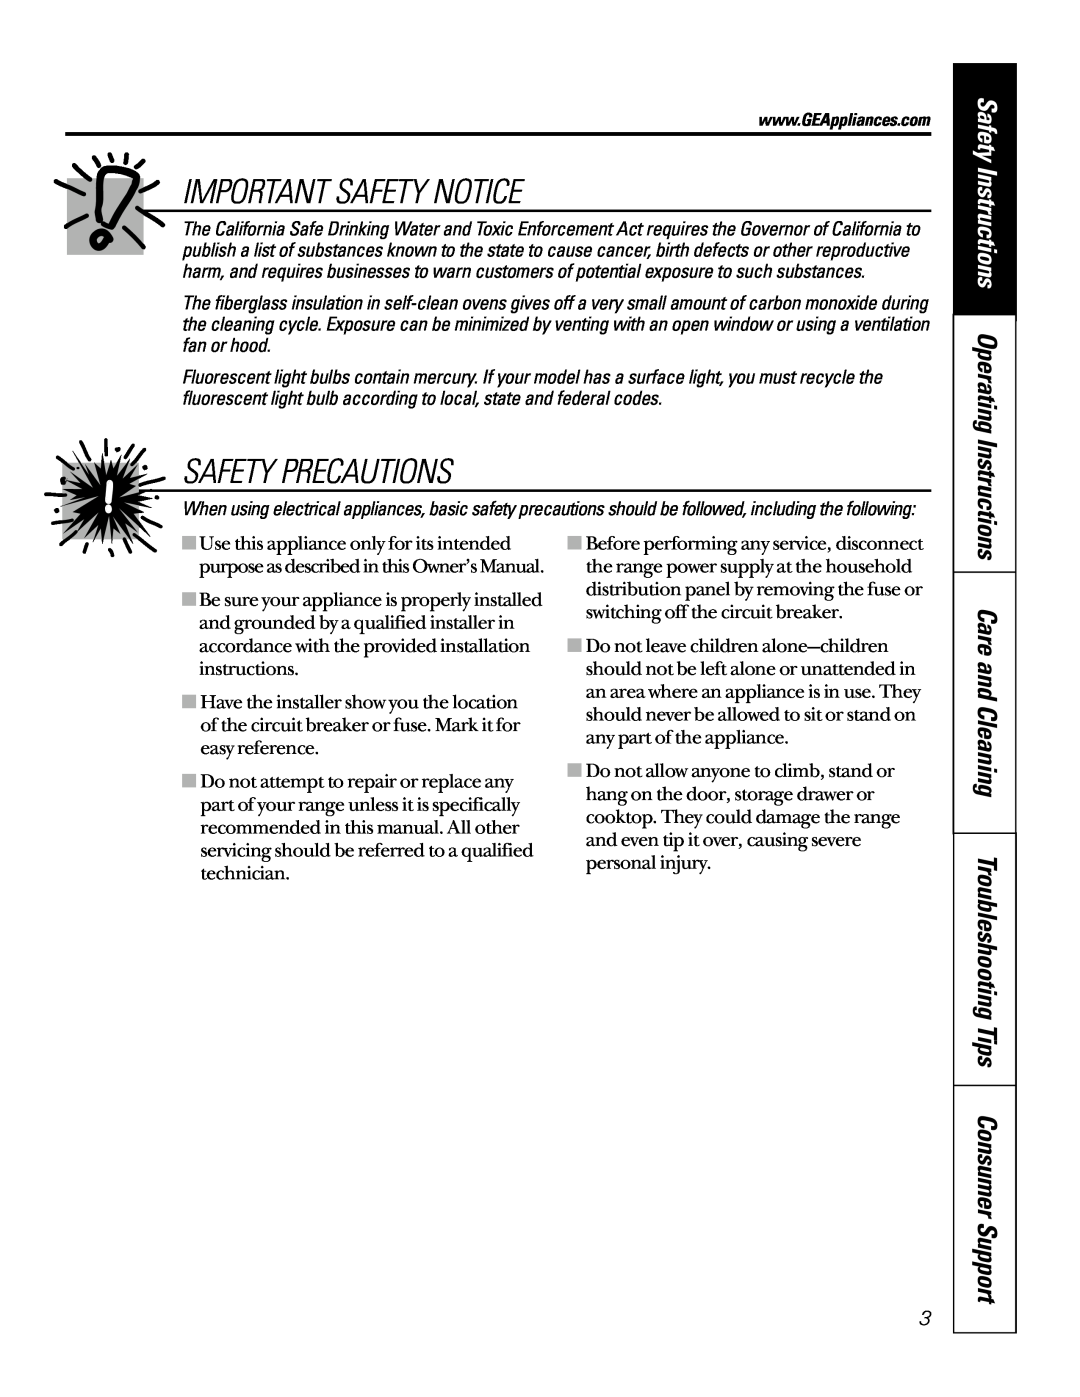 GE 49-80065 Important Safety Notice, Safety Precautions, Care and Cleaning Troubleshooting Tips Consumer Support 